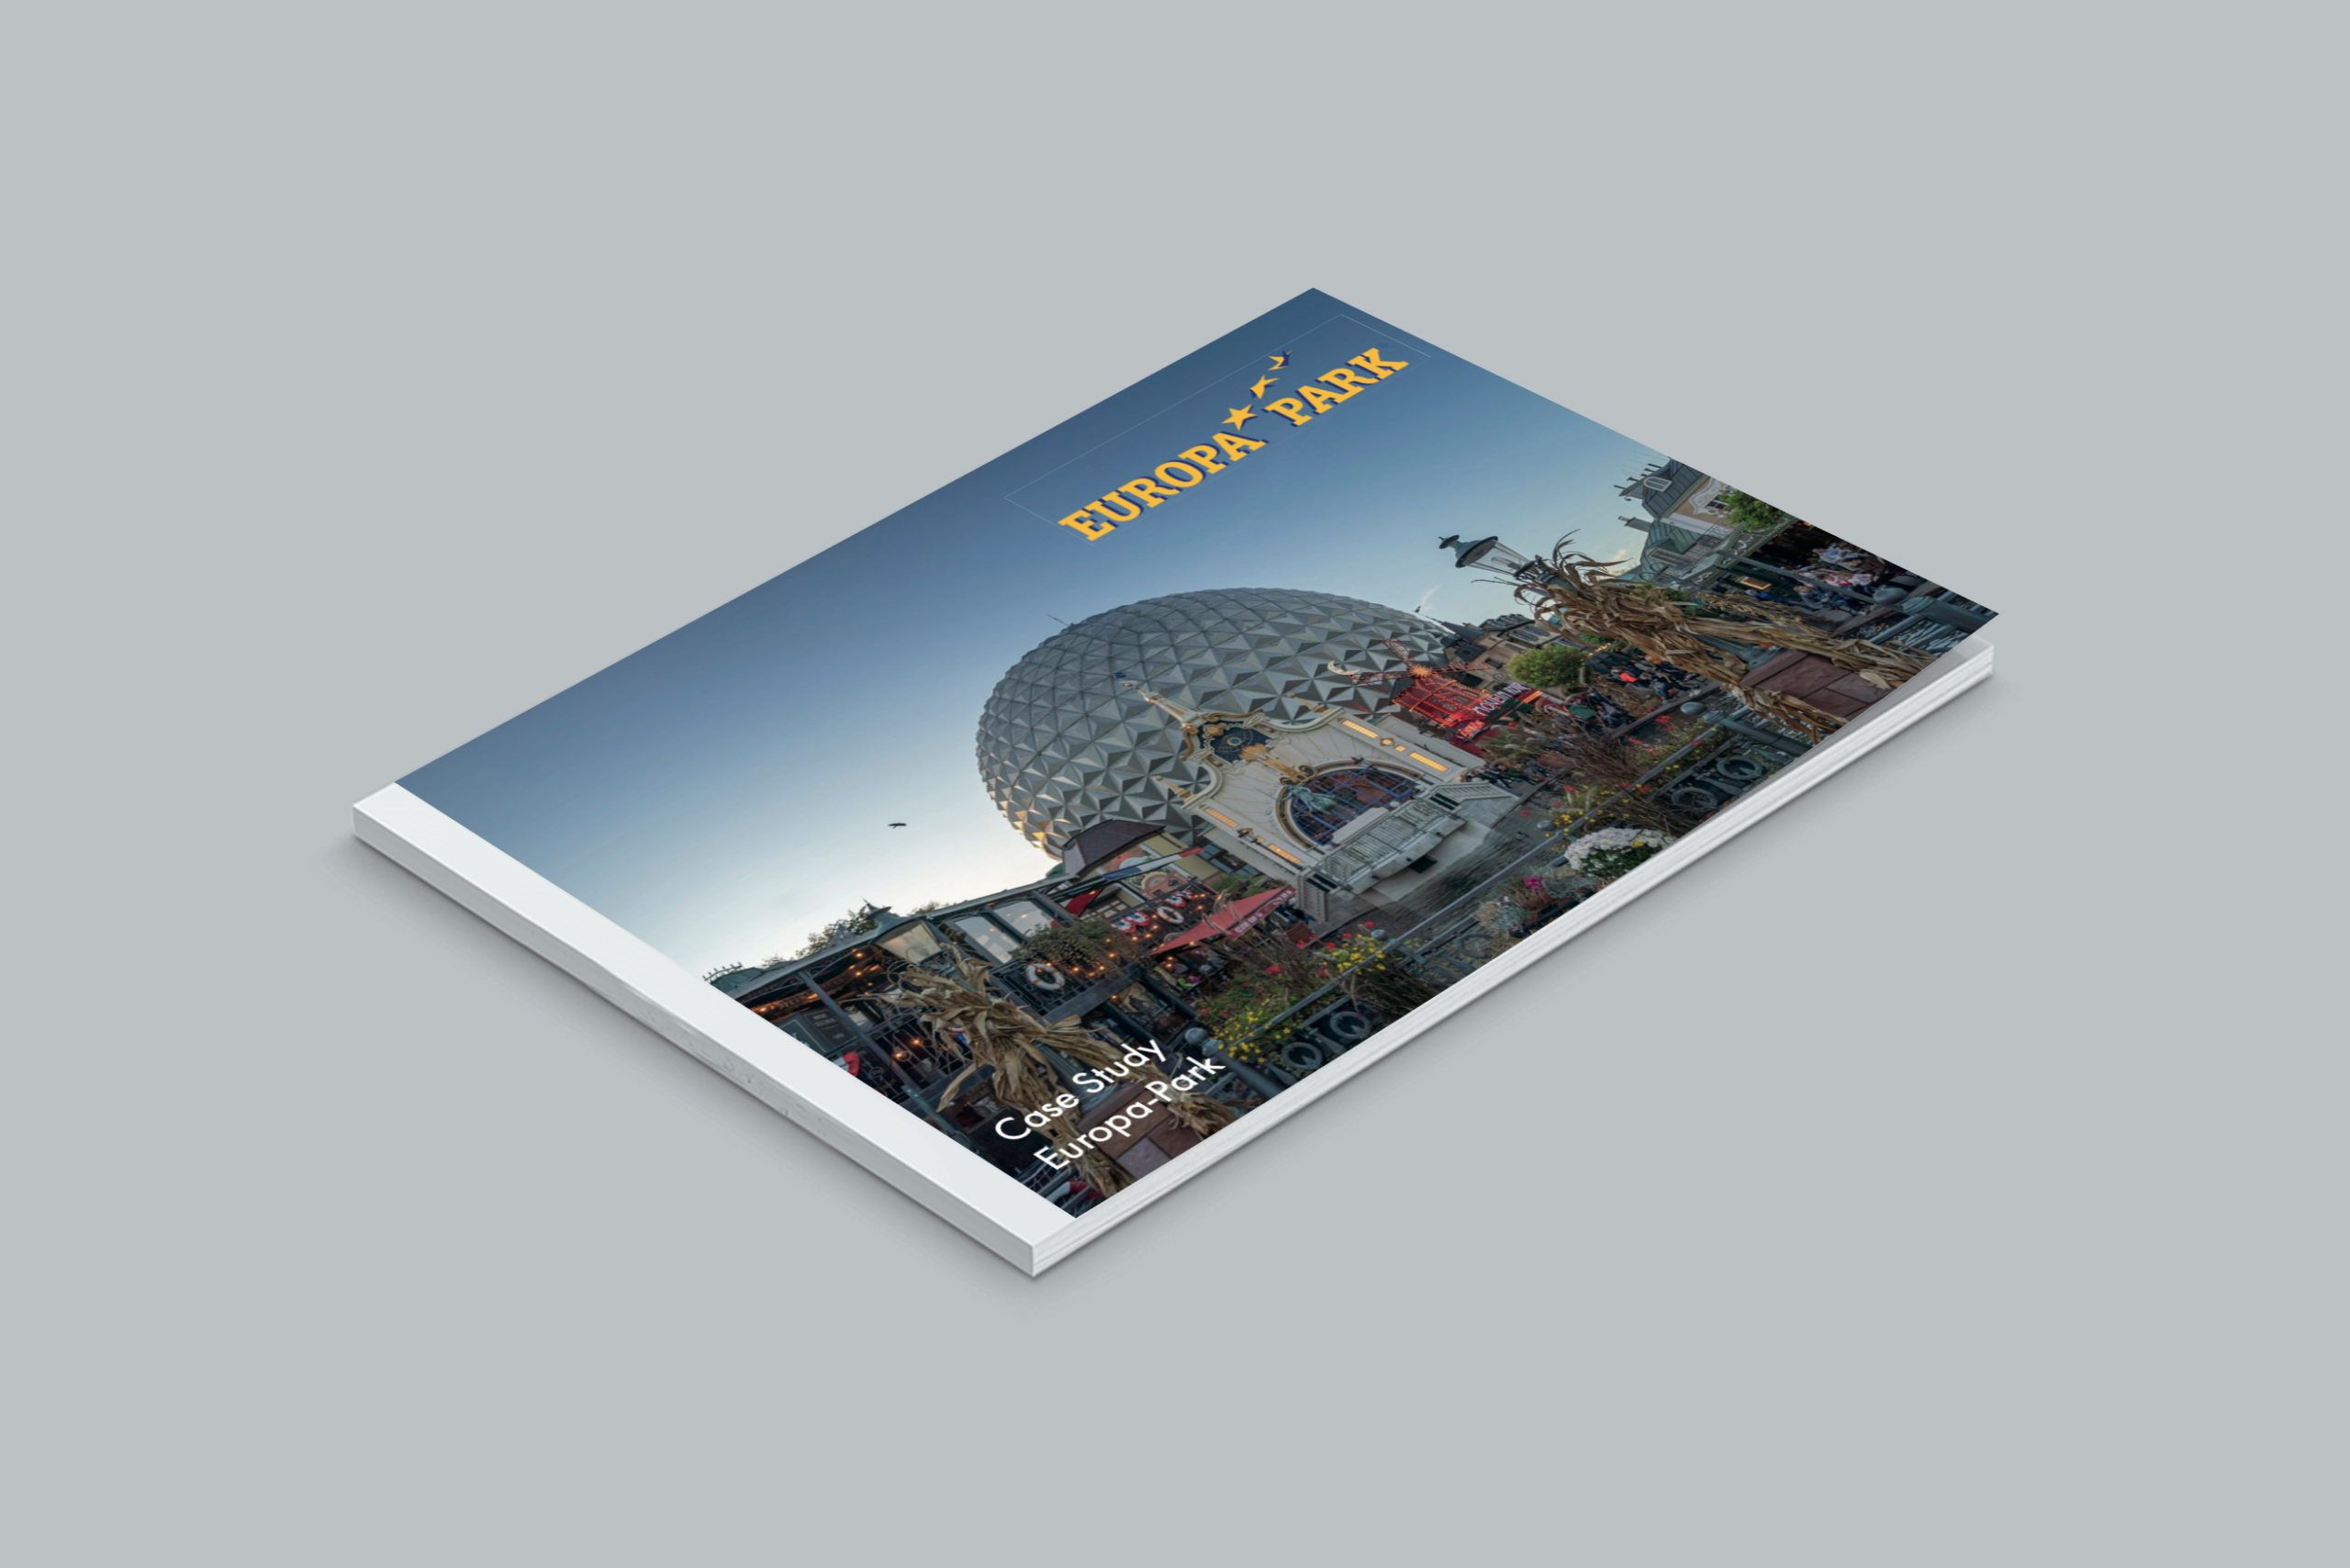 ecossystems europapark case study download scaled 04e31f65